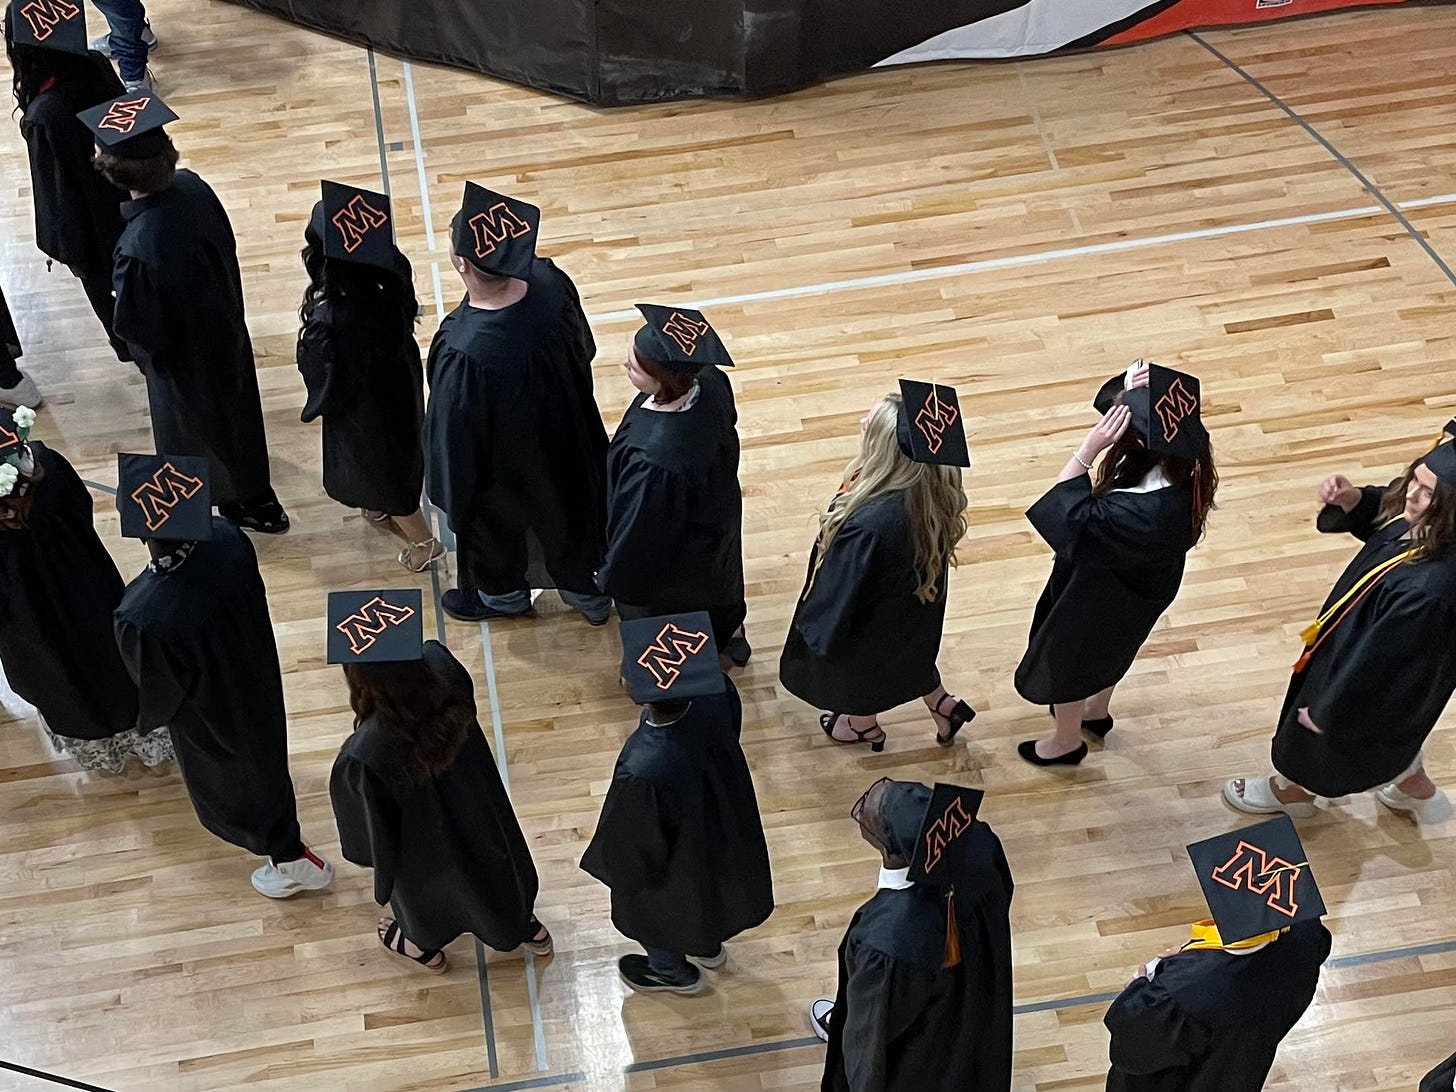 Young people in caps and gowns process across a hardwood floor